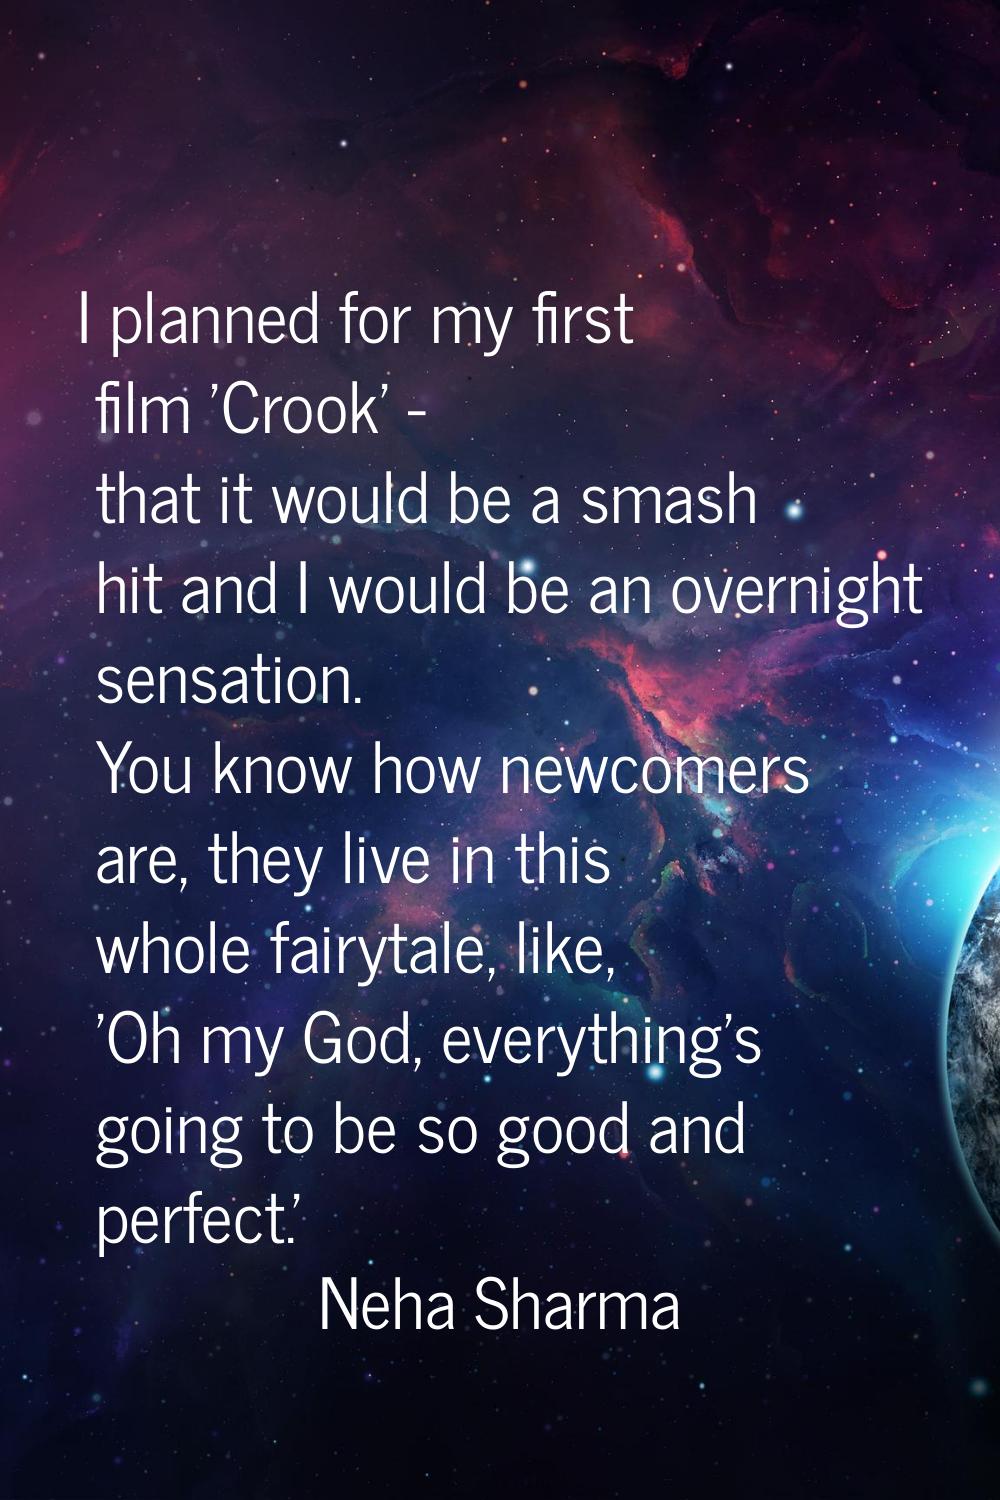 I planned for my first film 'Crook' - that it would be a smash hit and I would be an overnight sens